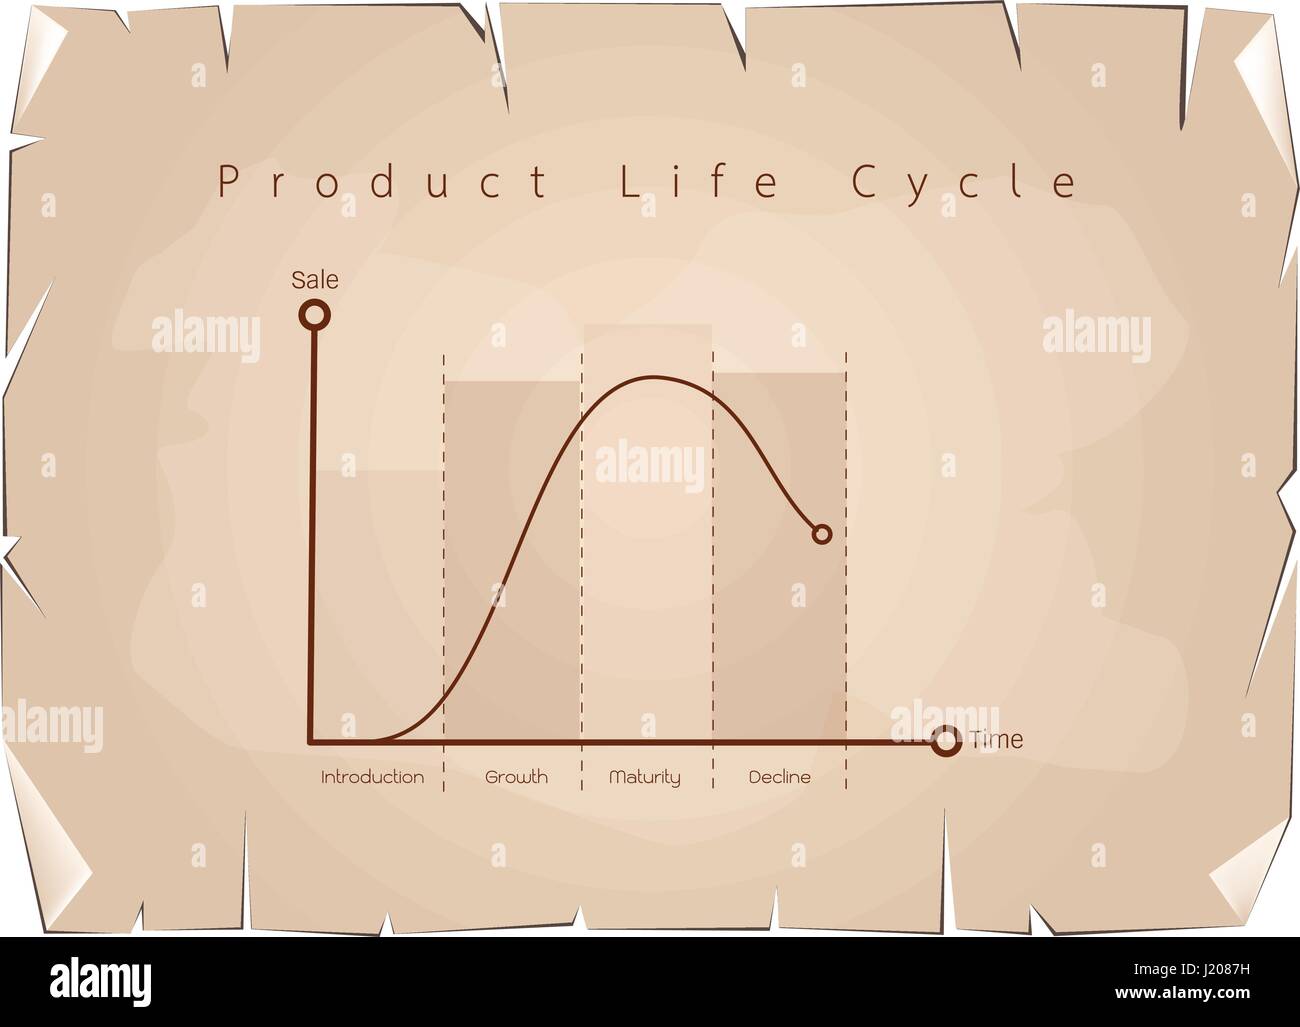 Business Life Cycle Chart